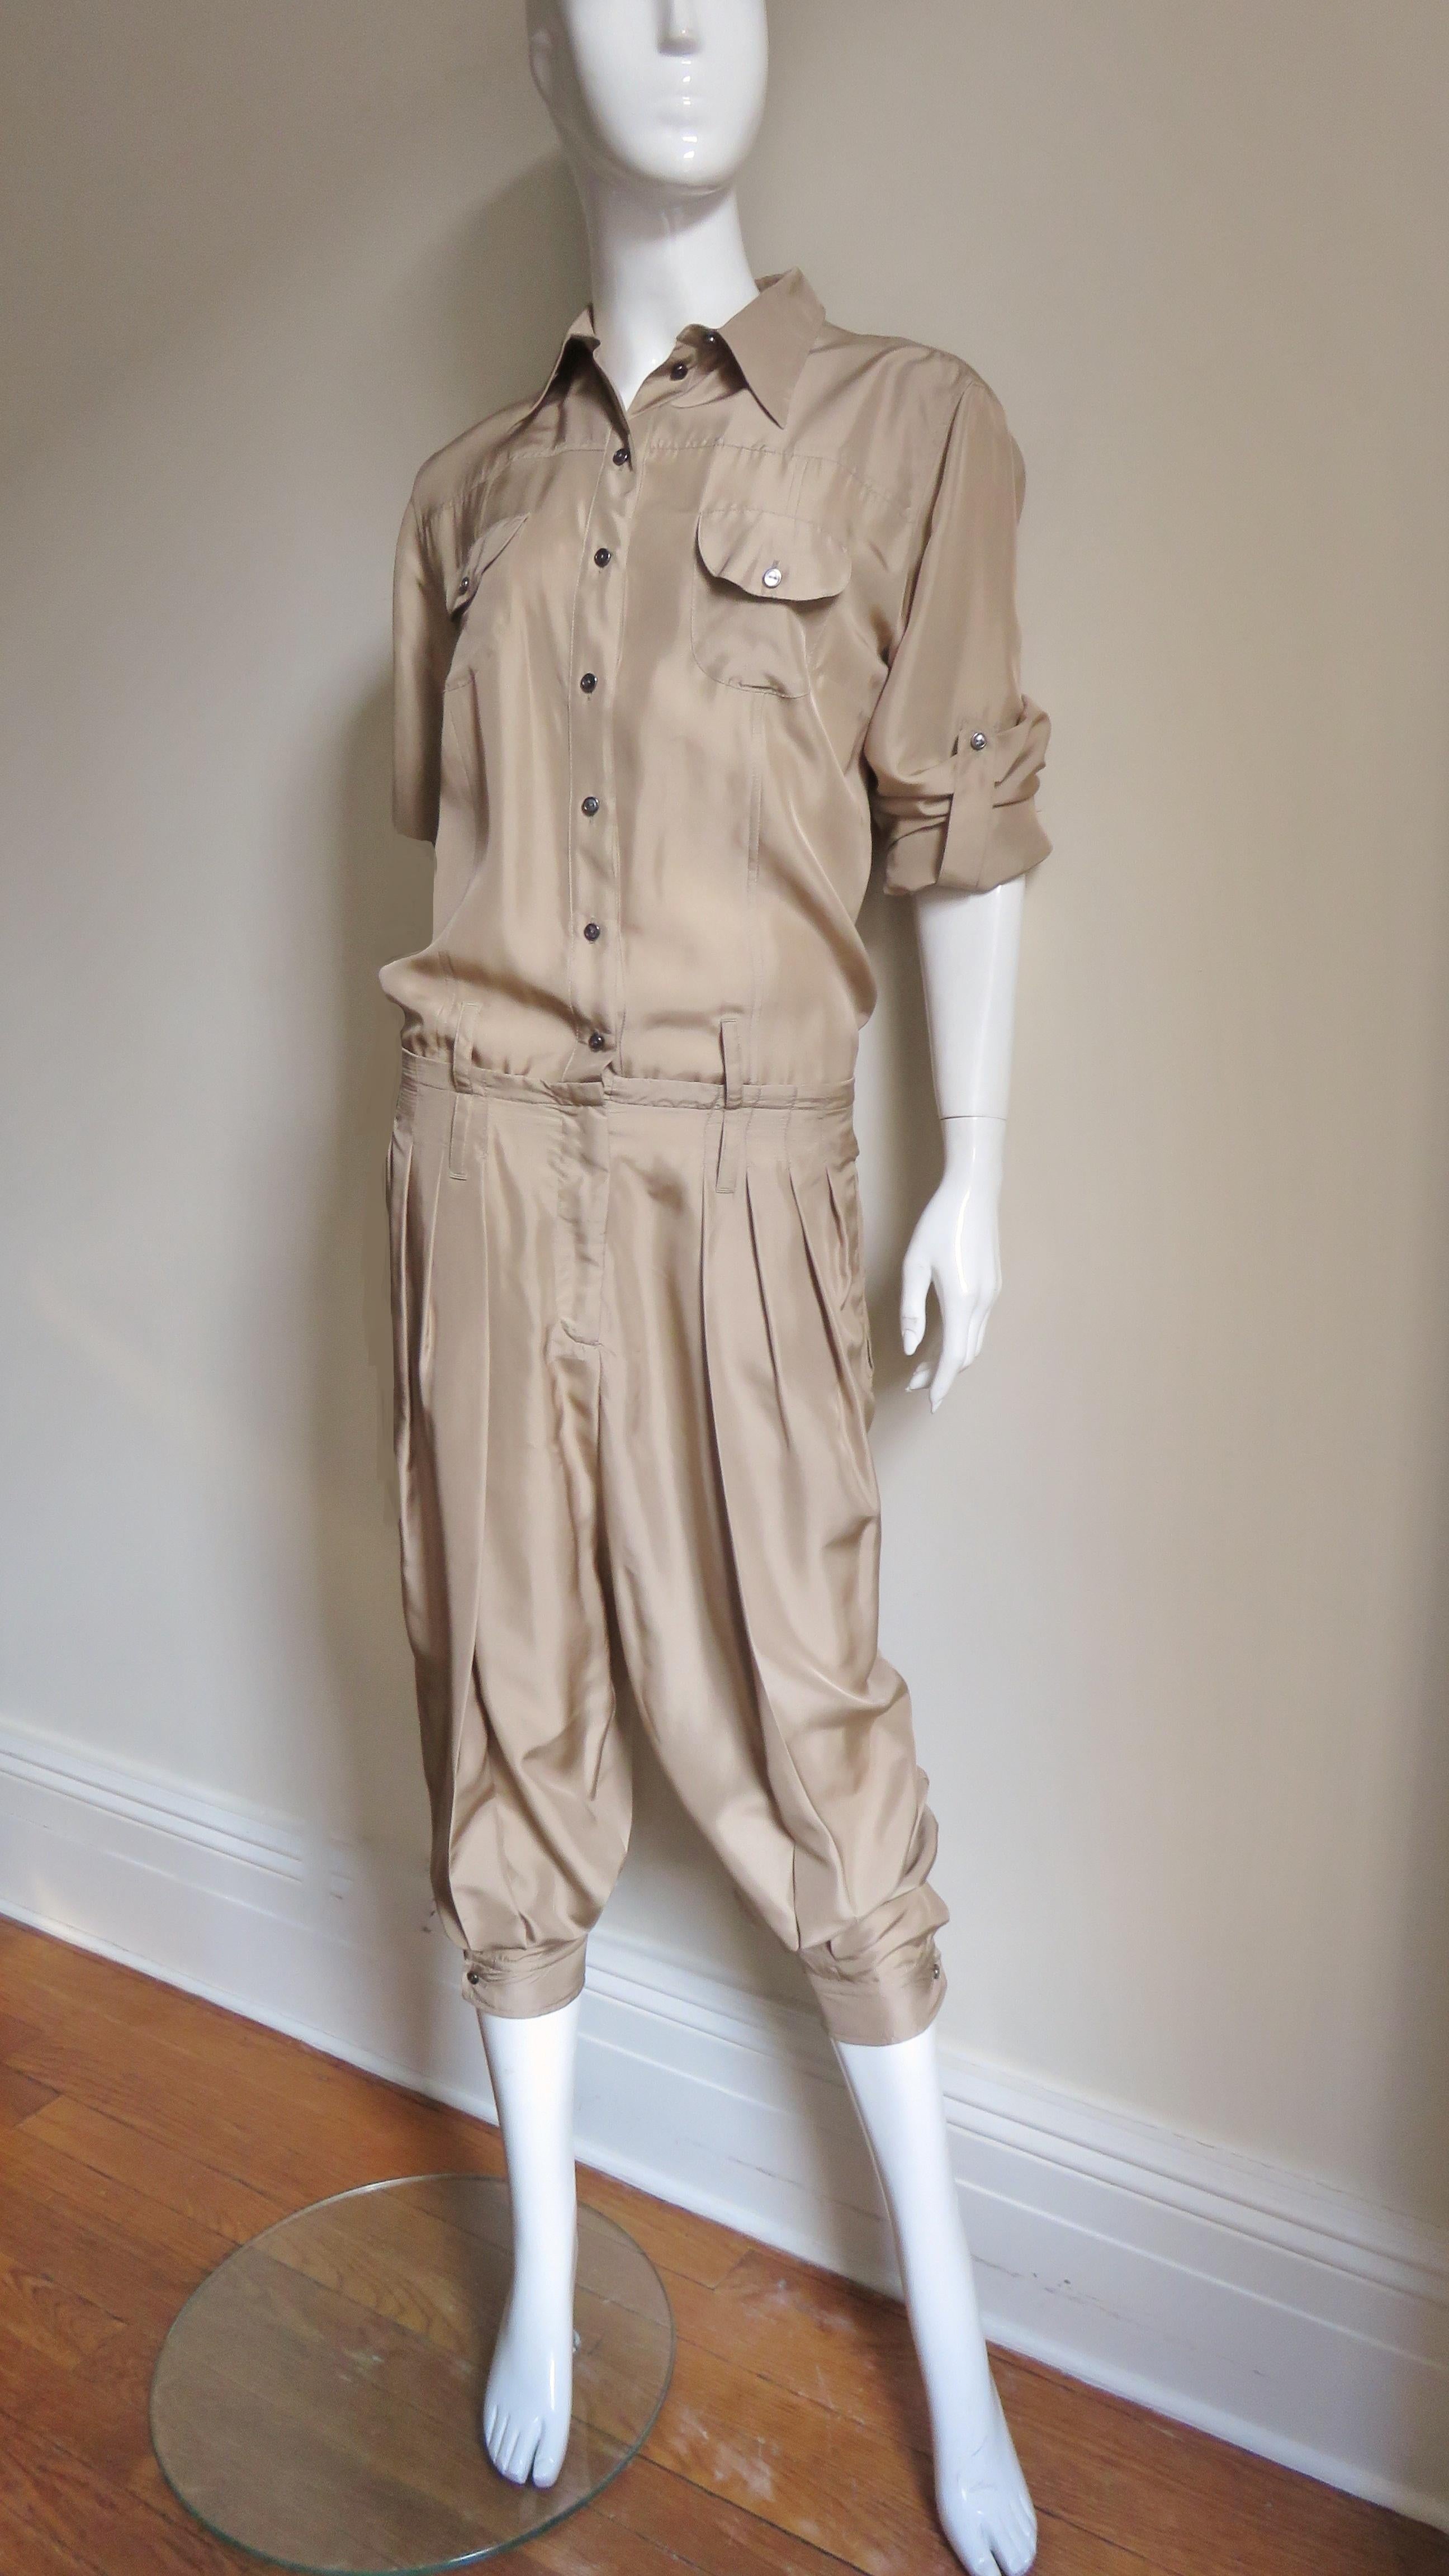 A fabulous khaki silk jumpsuit by Dolce & Gabbana.  It has a shirt collar, 2 breast pockets and a drop waistline.  The long sleeves have a 1 button cuff and the ability to be pulled up above the elbow and held in place with a button strap. The pants